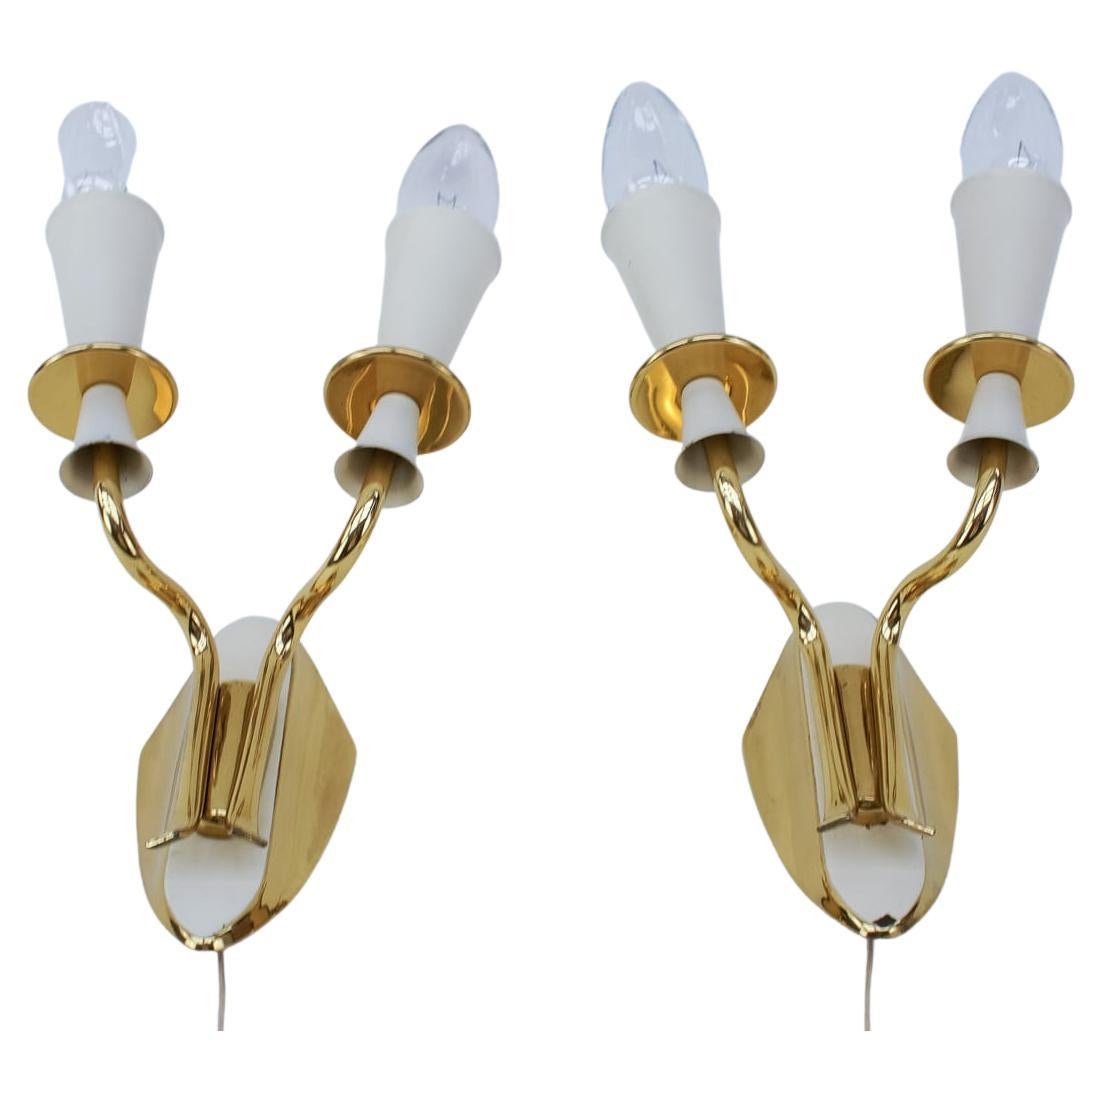 Pair of Double Arm Brass Wall Lamps from the 1950s